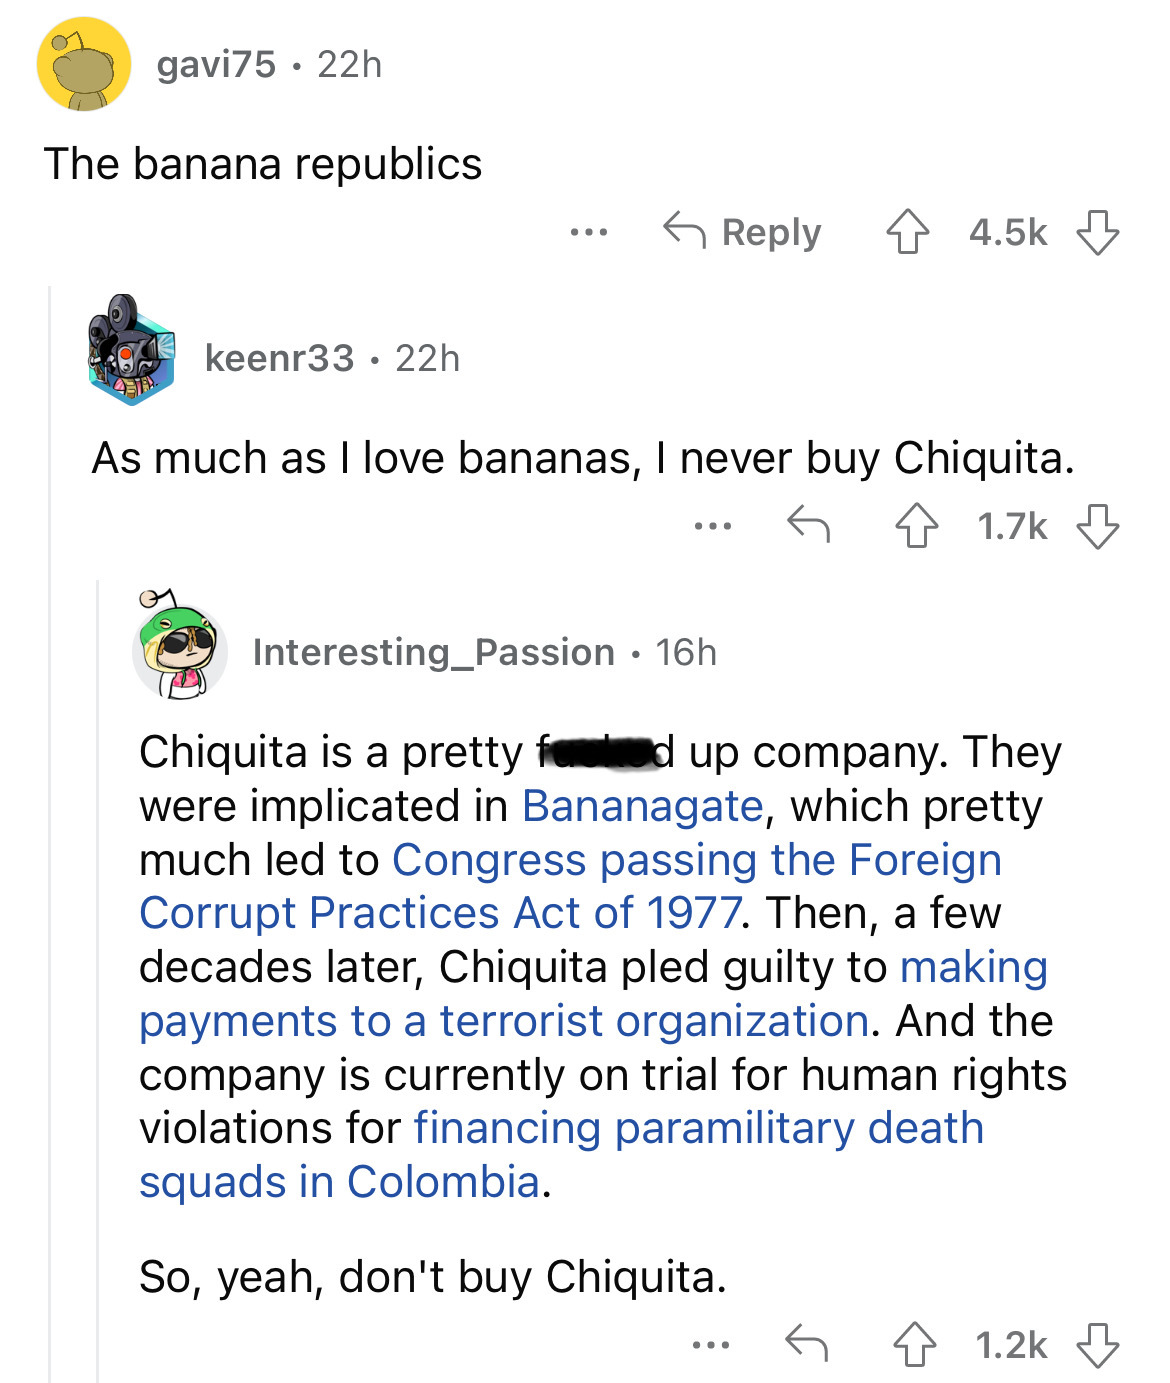 angle - 22h gavi75 The banana republics keenr33 22h ... As much as I love bananas, I never buy Chiquita. ... Interesting_Passion 16h Chiquita is a pretty feed up company. They were implicated in Bananagate, which pretty much led to Congress passing the Fo